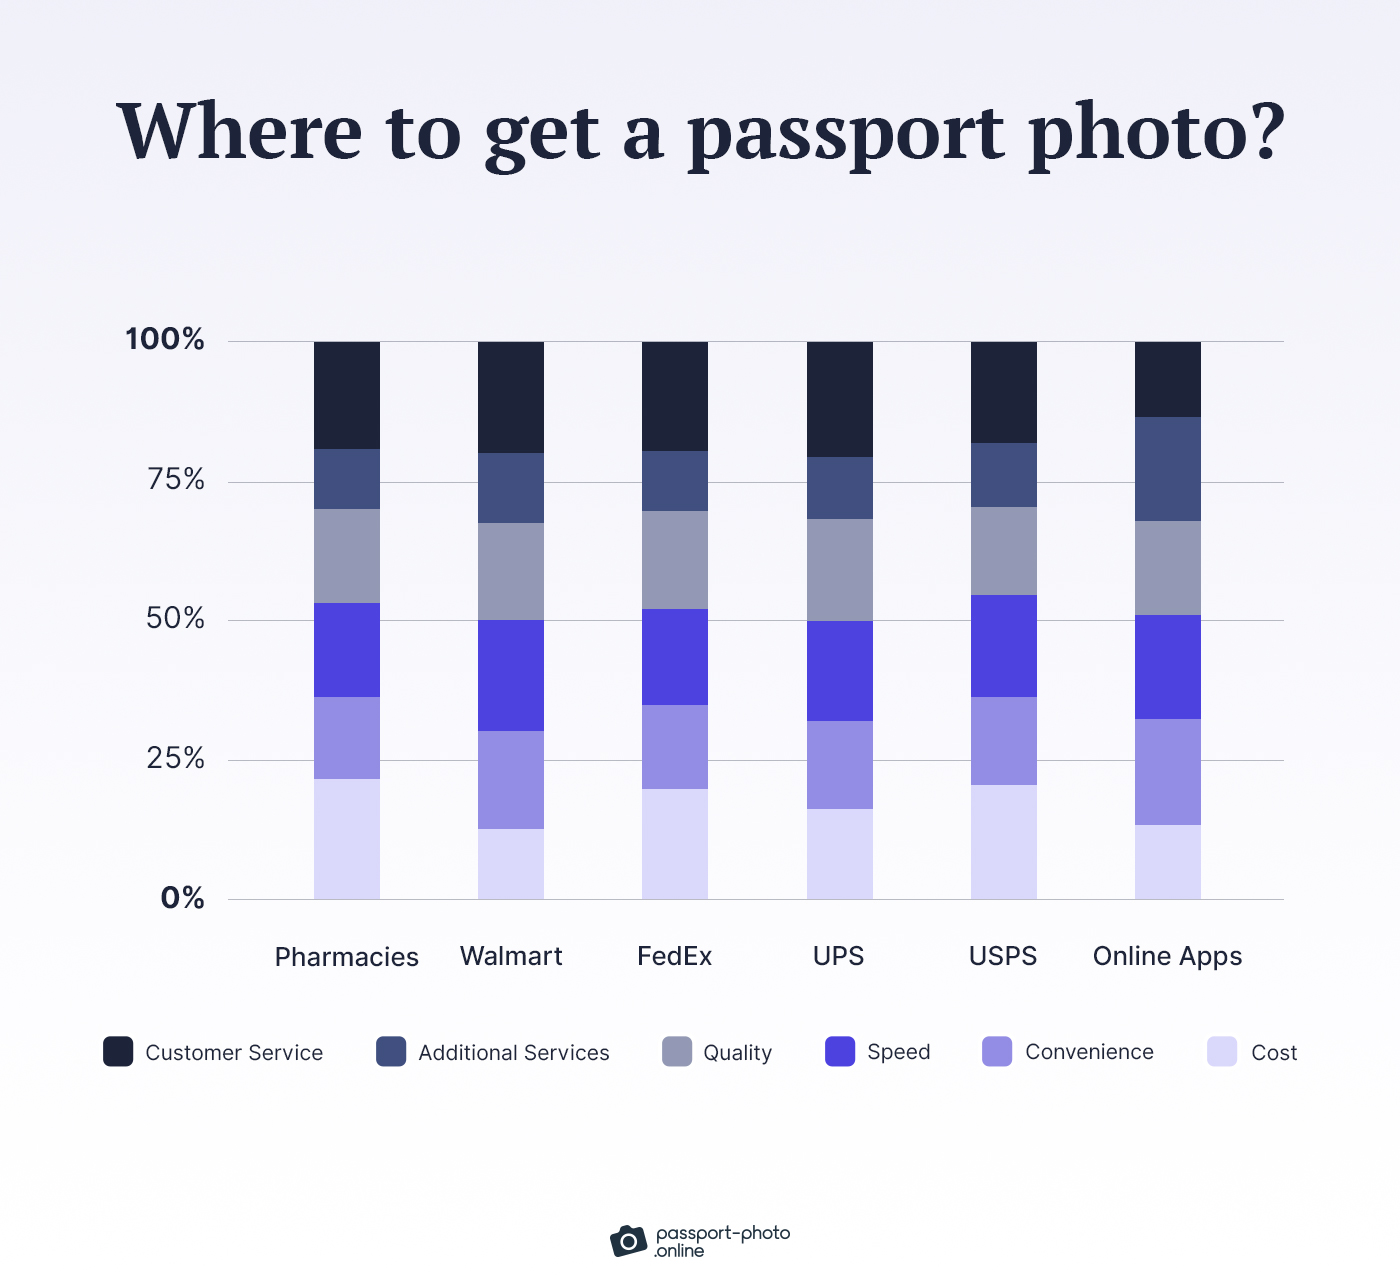 A bar graph comparing the various places to get passport photos according to cost, convenience, speed, additional services, and customer service.